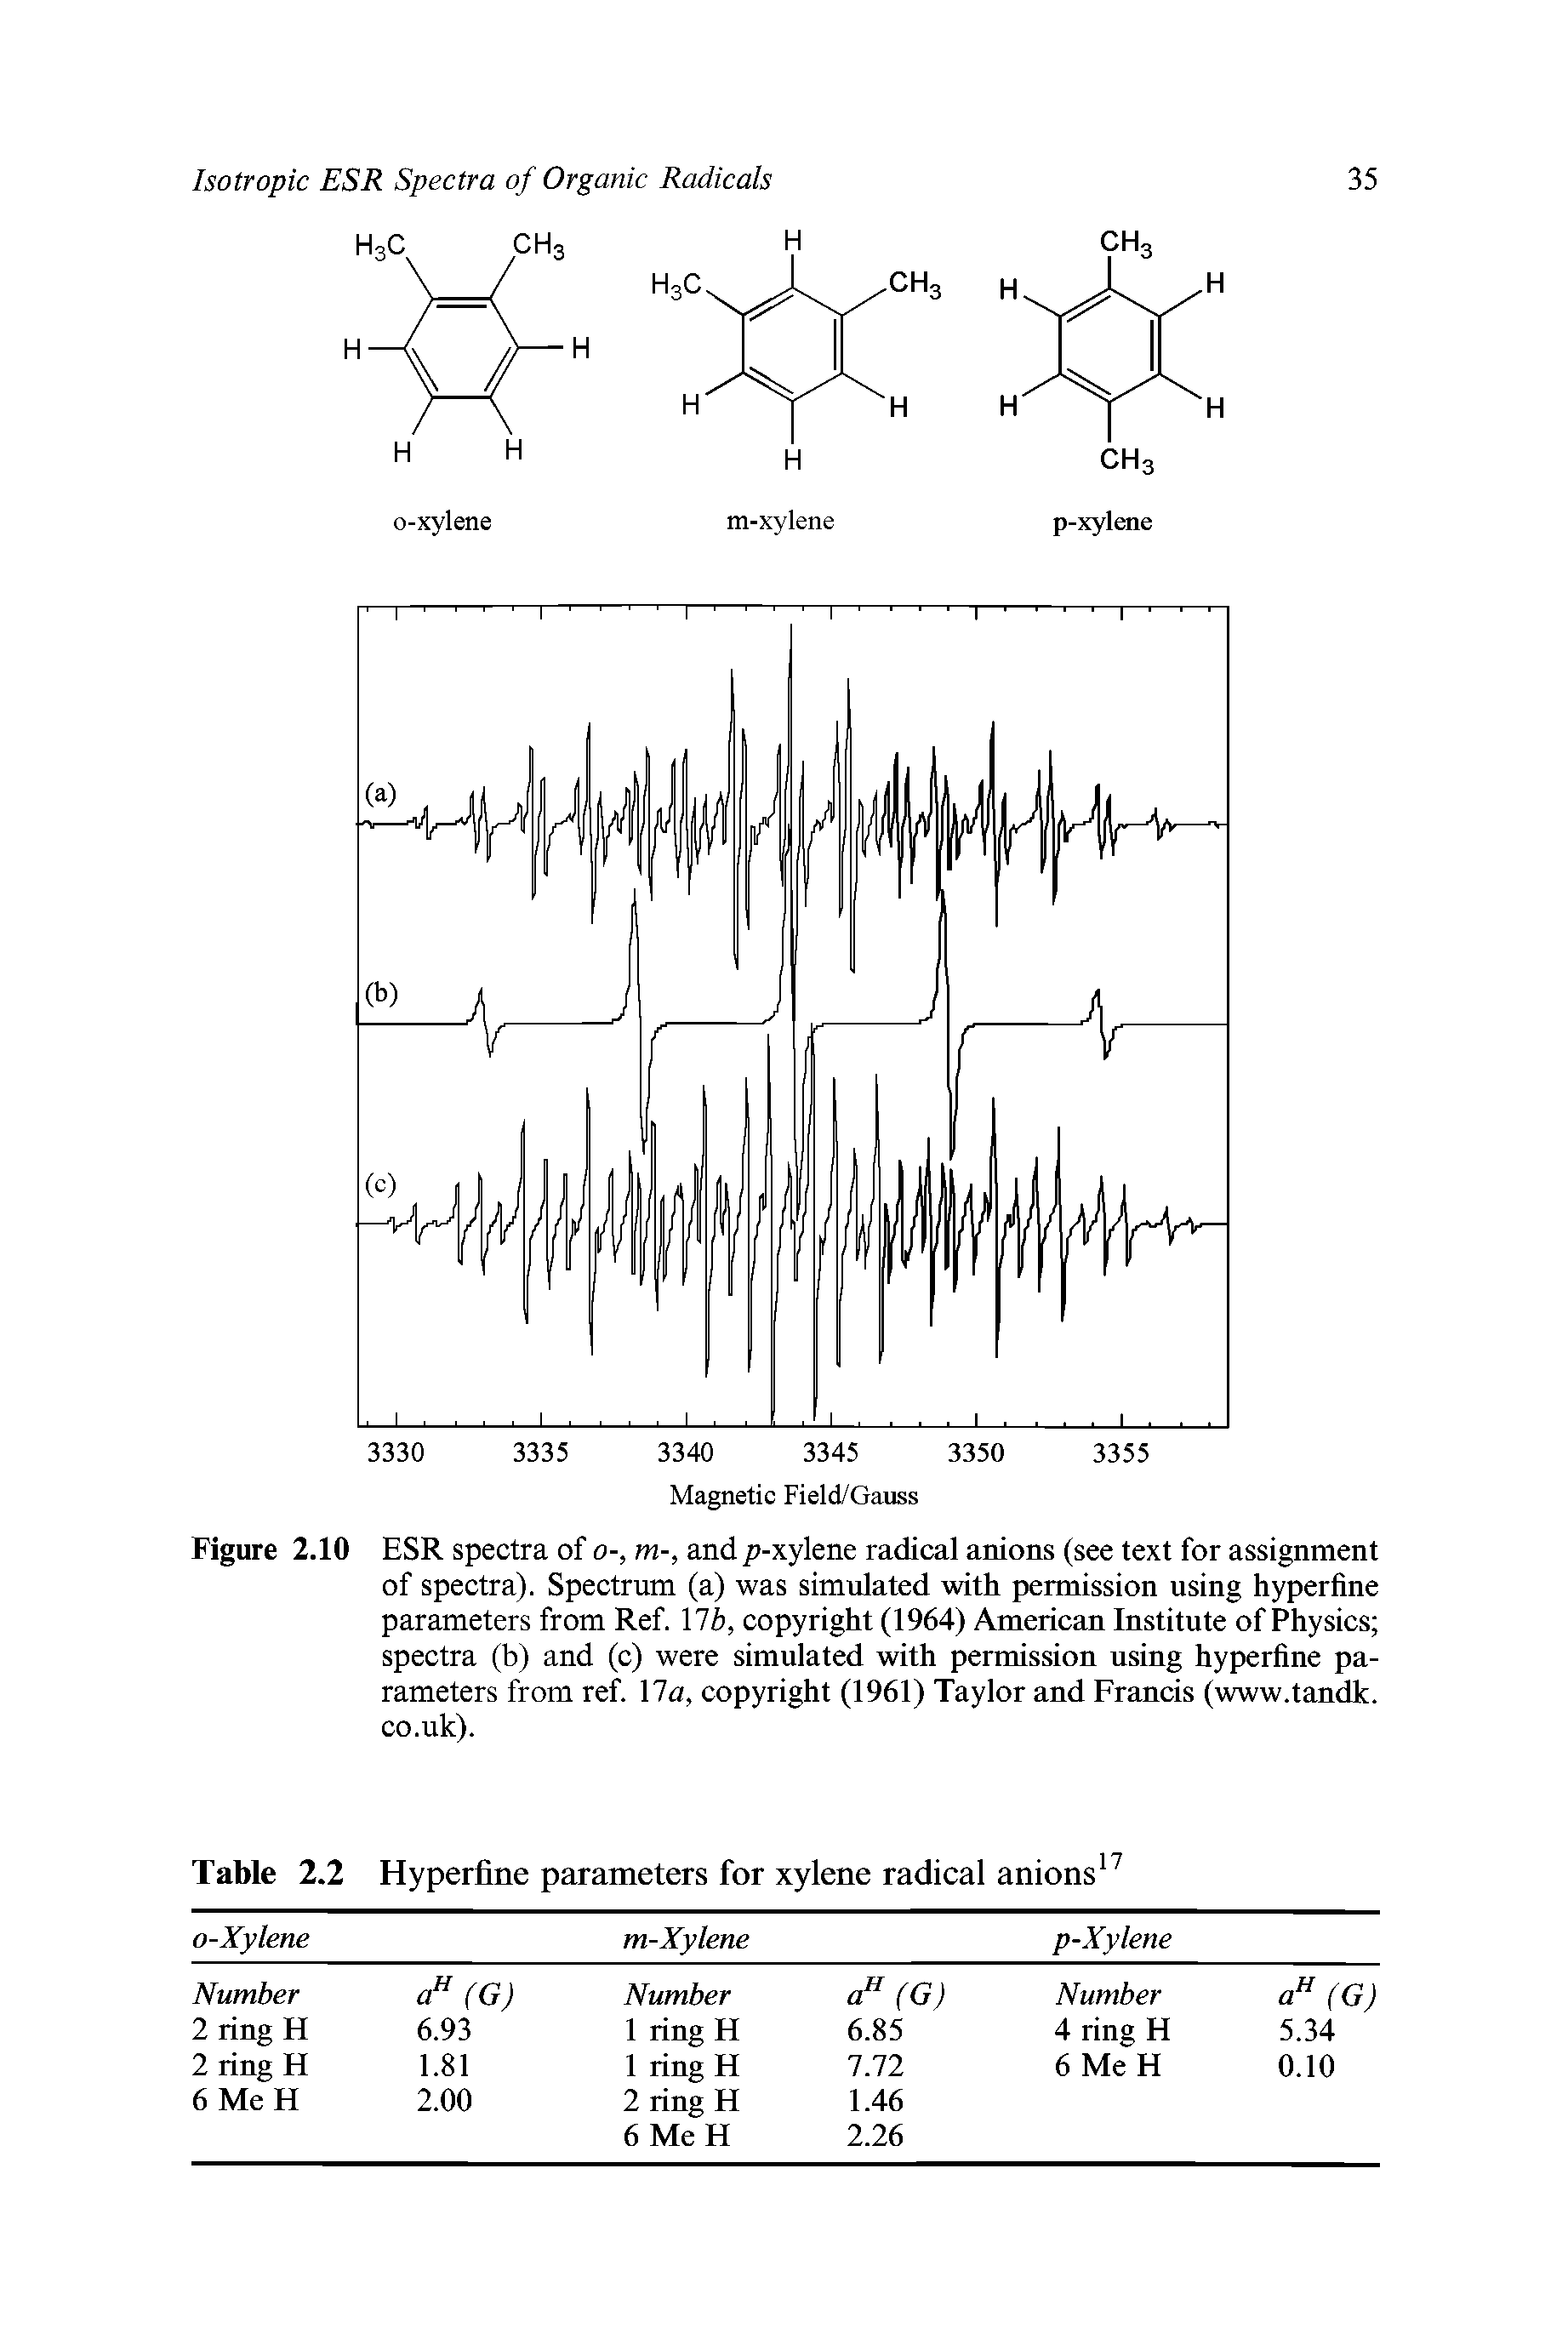 Figure 2.10 ESR spectra of o-, m-, and p-xylene radical anions (see text for assignment of spectra). Spectrum (a) was simulated with permission using hyperfine parameters from Ref. 17b, copyright (1964) American Institute of Physics spectra (b) and (c) were simulated with permission using hyperfine parameters from ref. 17a, copyright (1961) Taylor and Francis (www.tandk. co.uk).